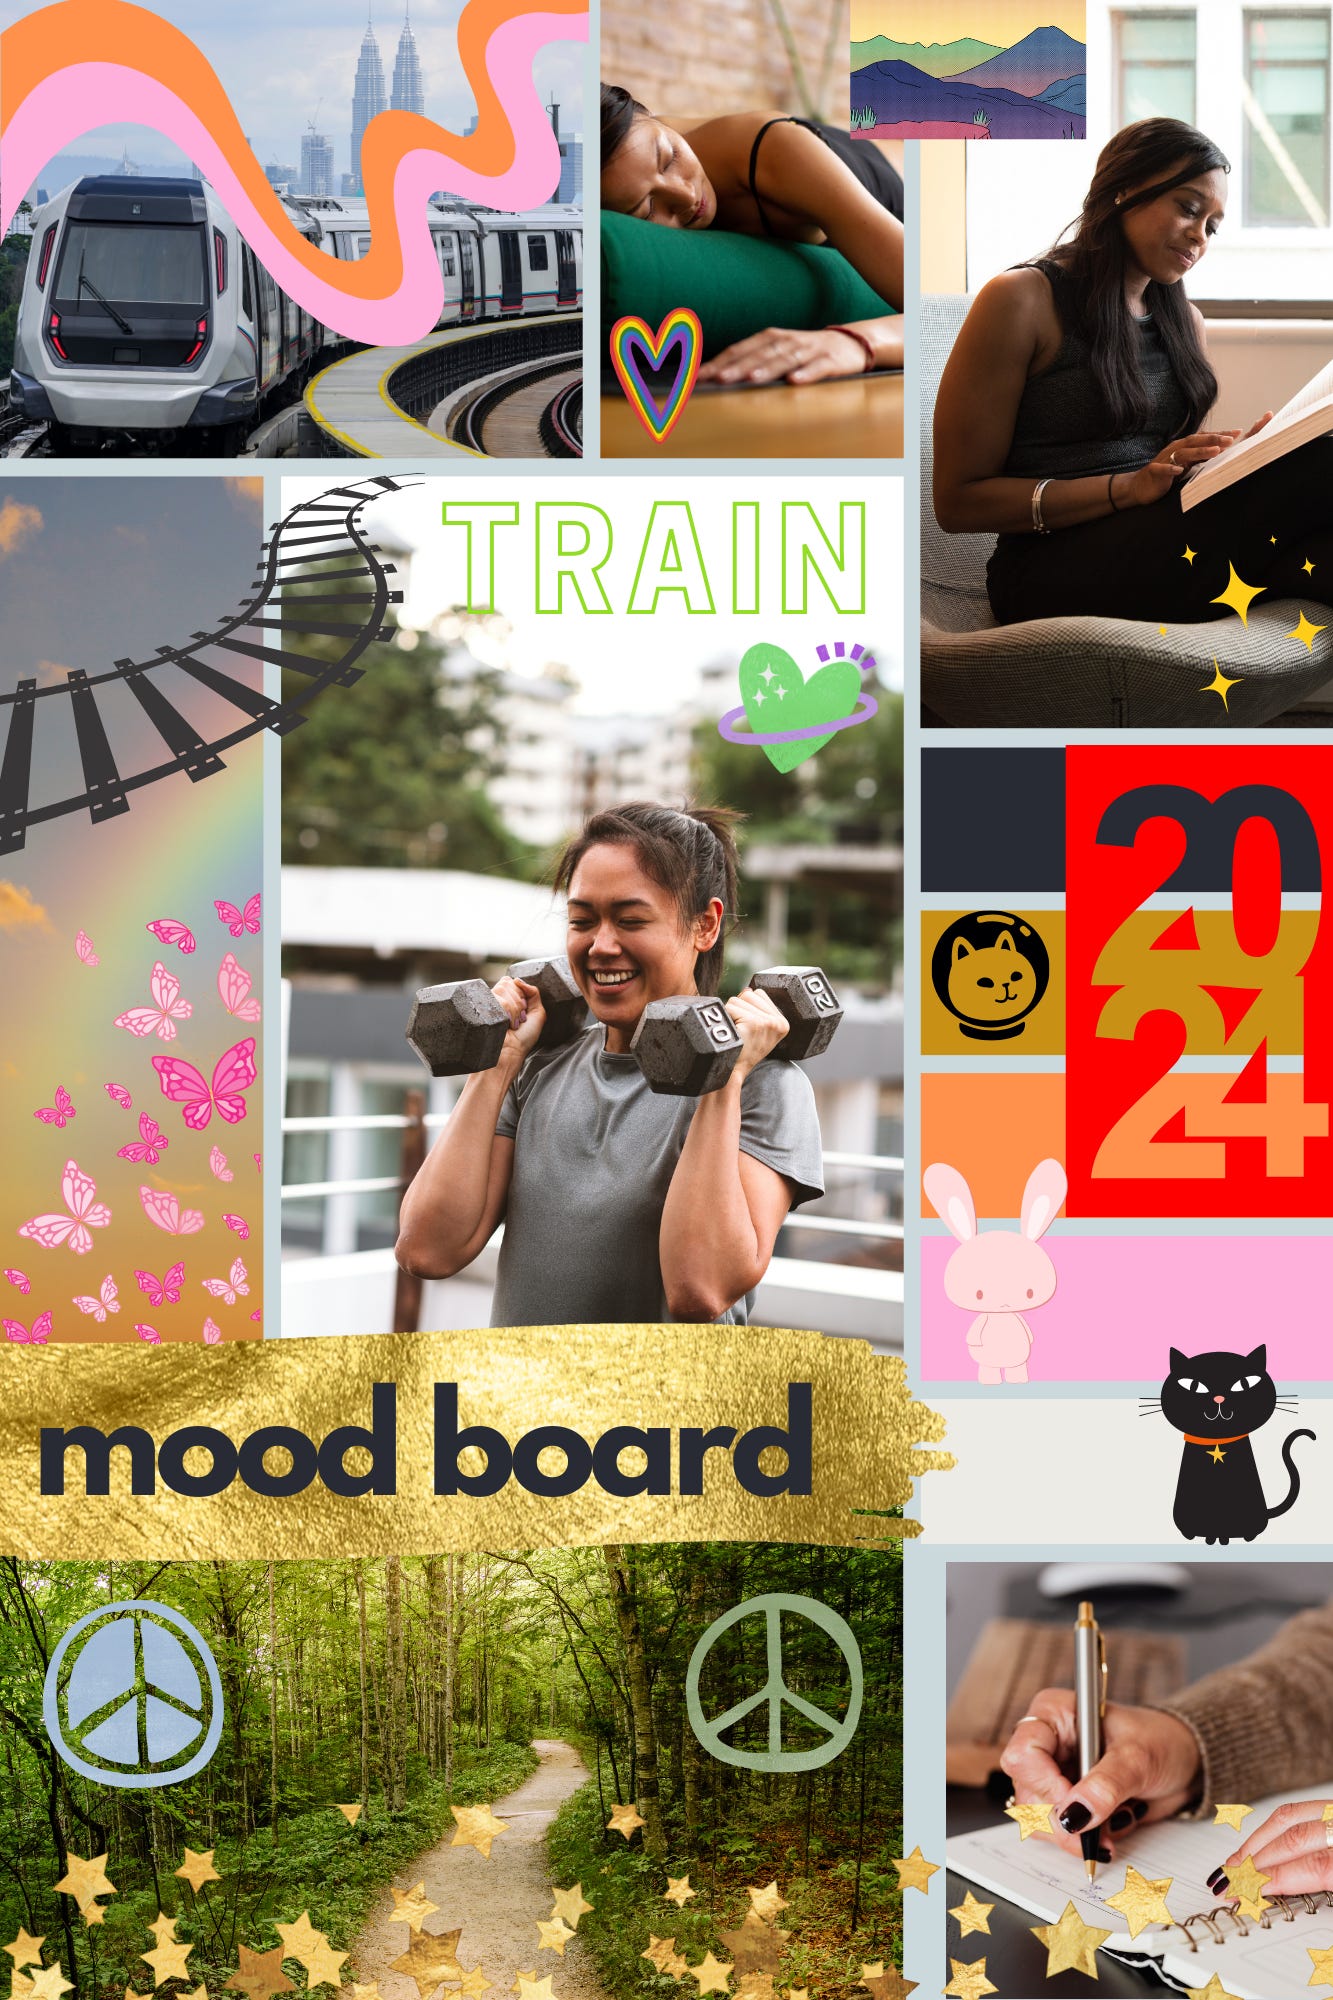 Mood board featuring images of women reading, writing, lifiting weights, and doing restorative yoga. The theme is "train".